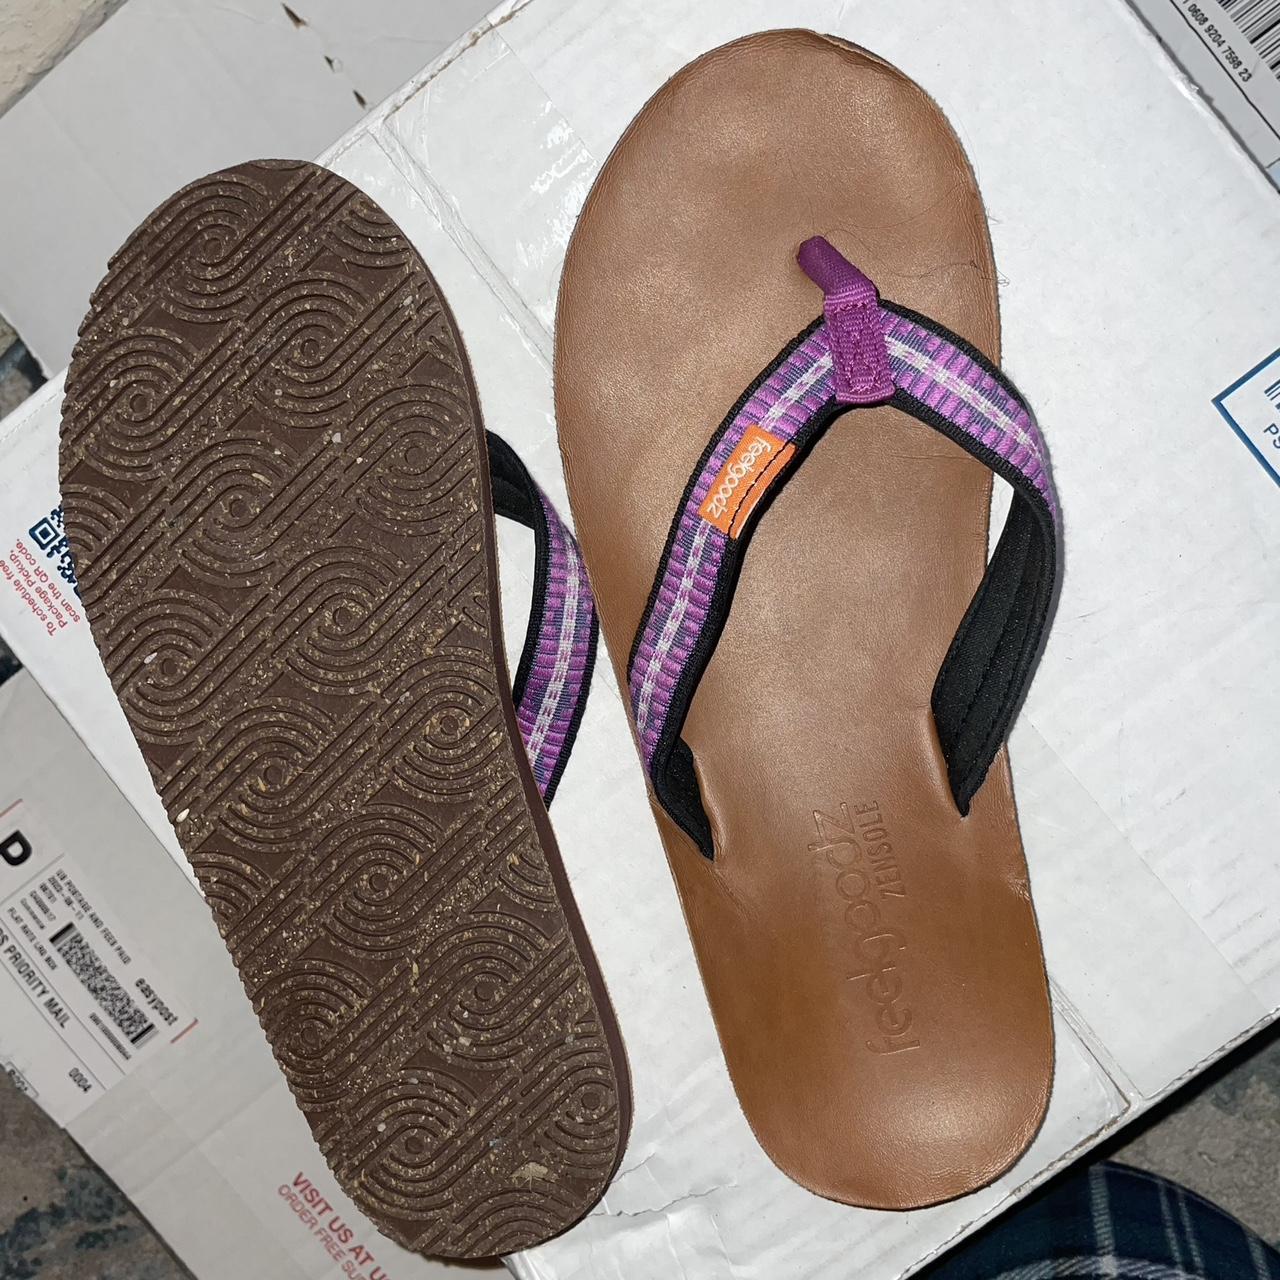 Feelgoodz flip flops💜🧡, Barely worn, Open to offers